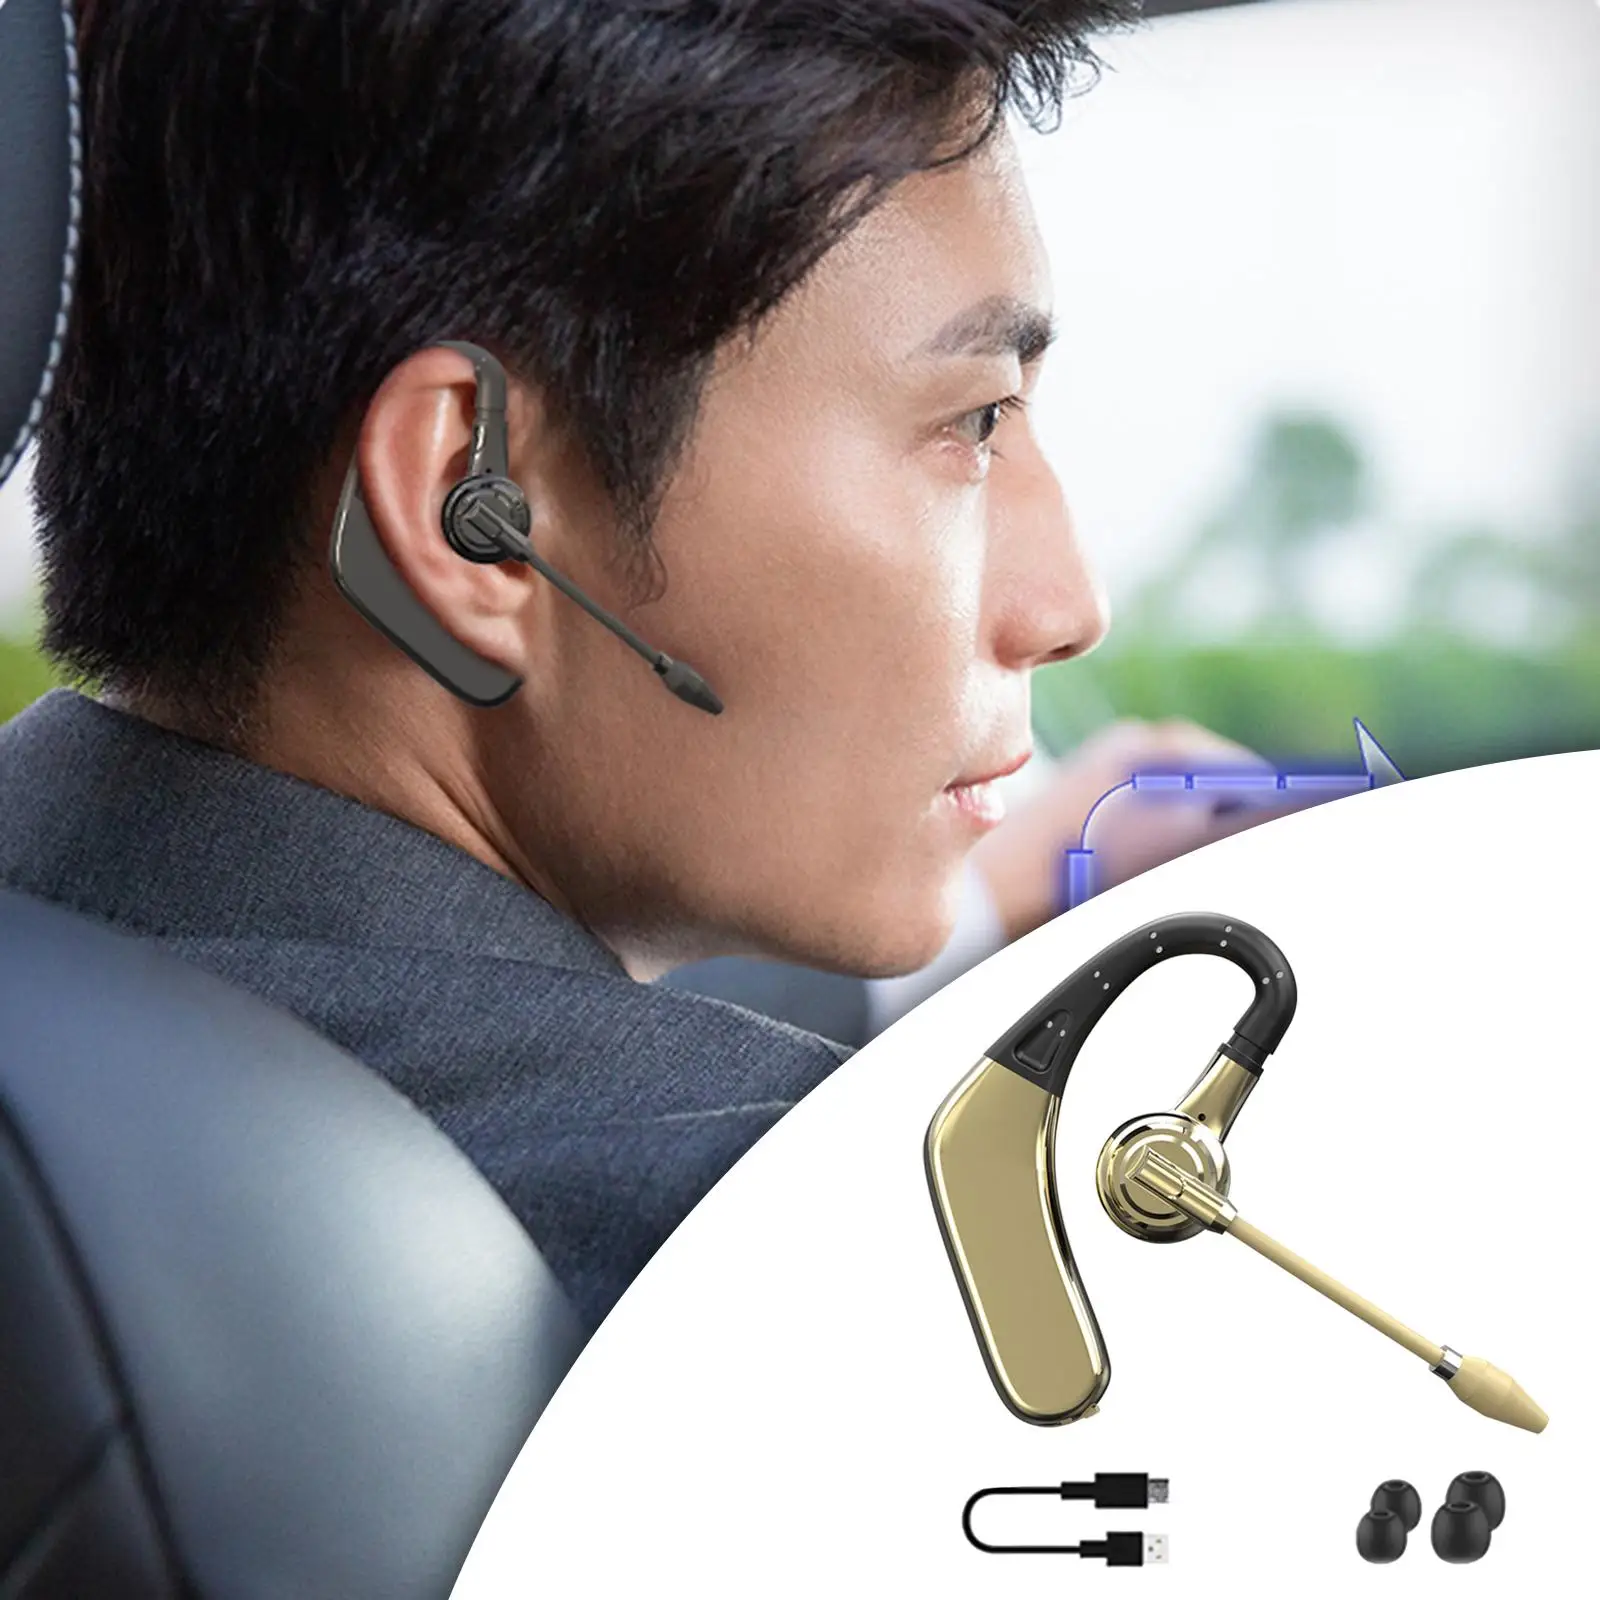 Wireless Bluetooth Headphone Intelligent Noise Reduction Earphones 180° Rotating Earpiece HD Call Sweatproof for Game Driver